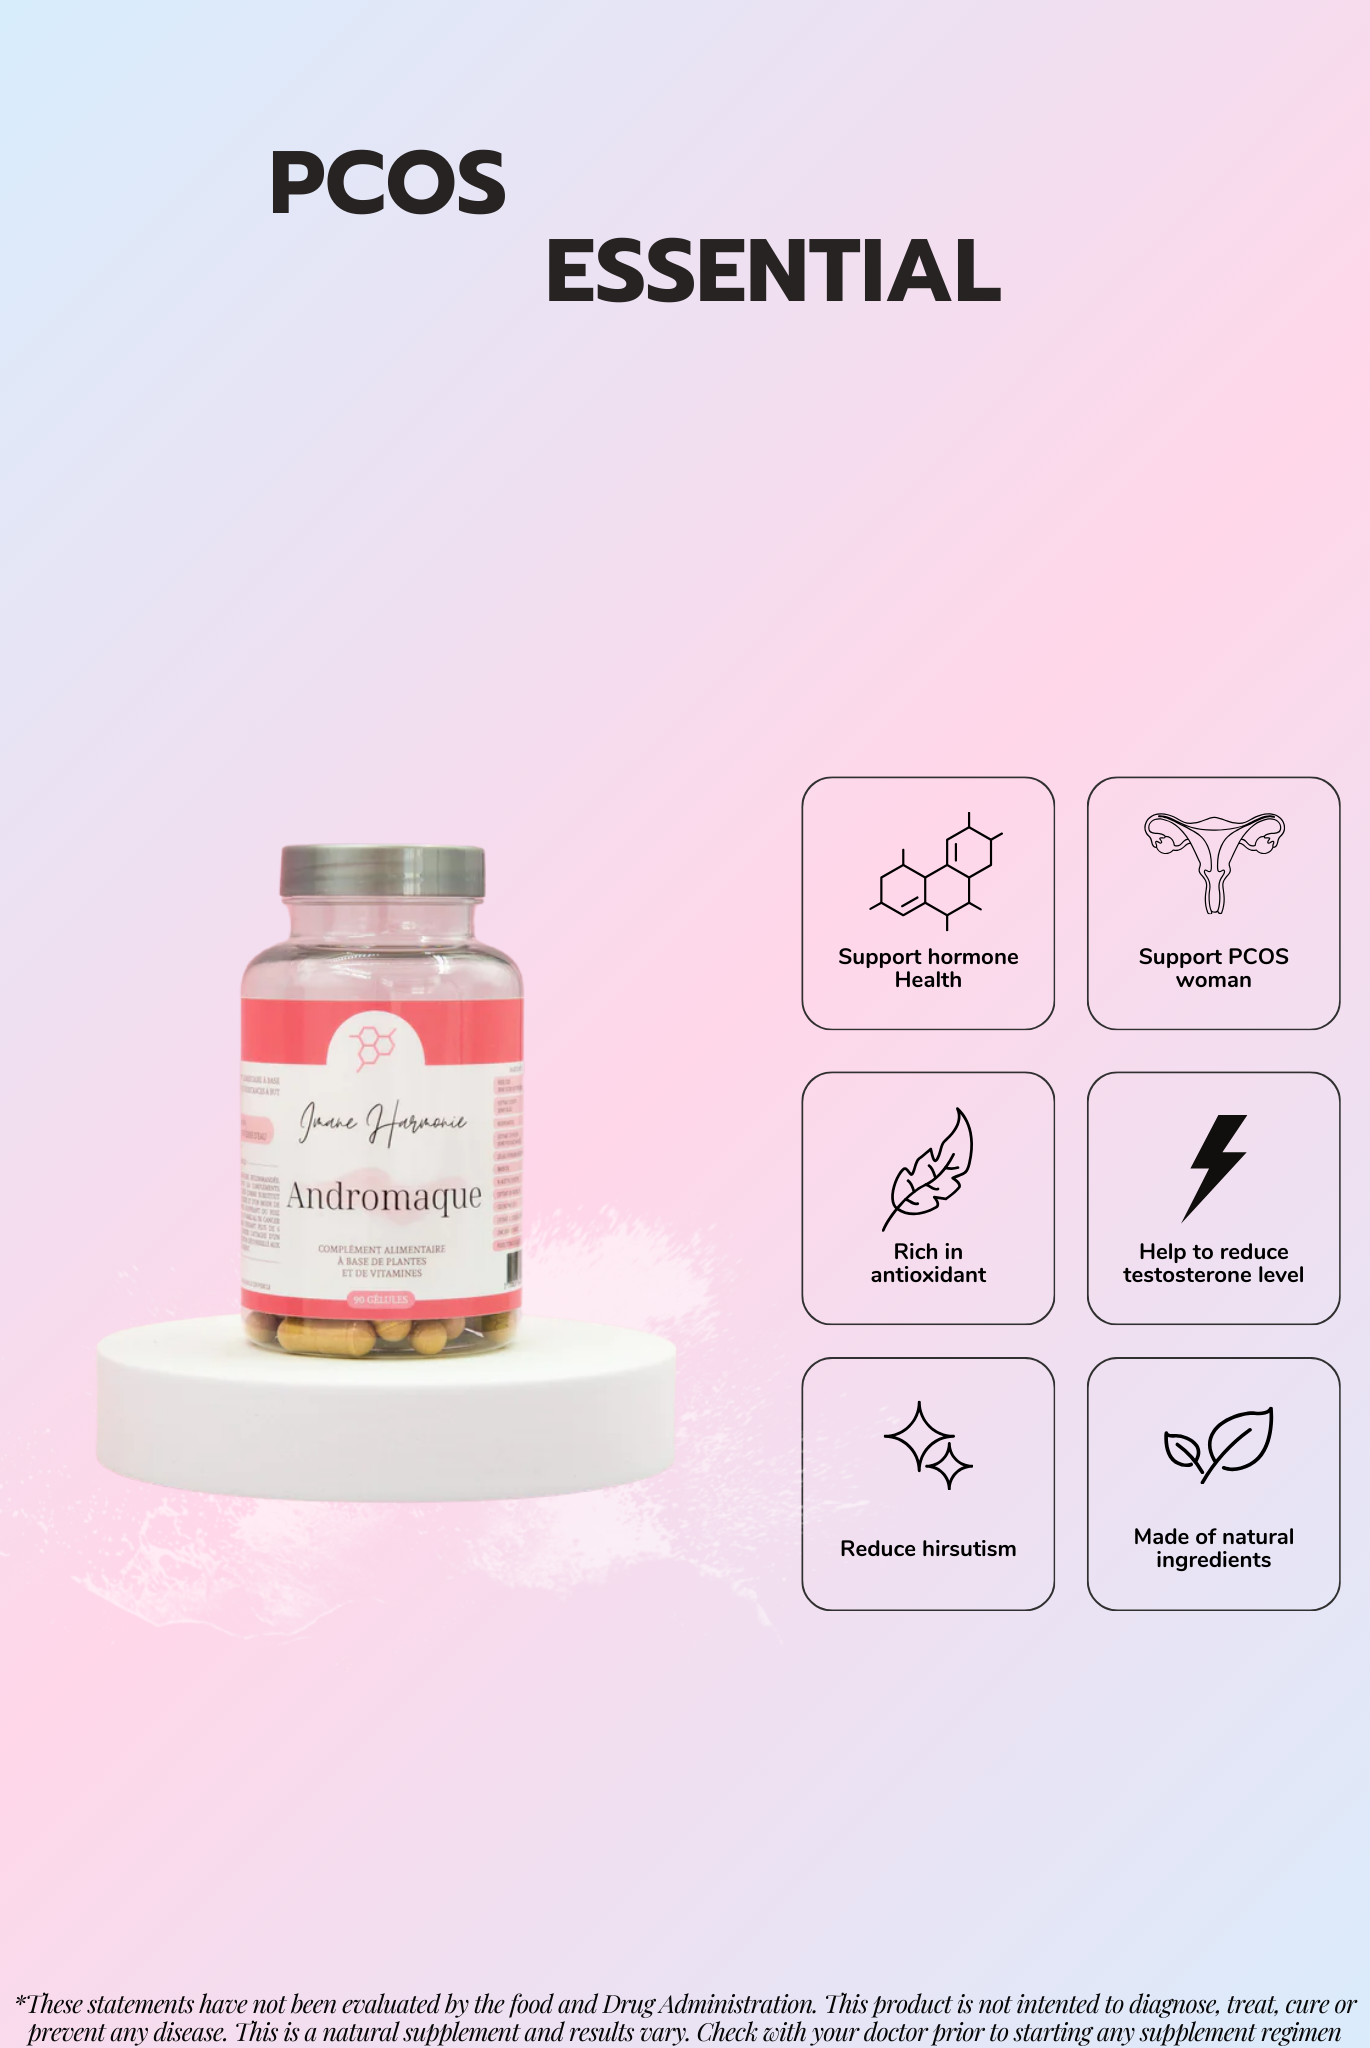 Features of Andromaque supplement : Support hormone health, support pcos woman, rich in antioxidant, help to reduce testosterone level, reduce hirsutism, made of natural ingredients